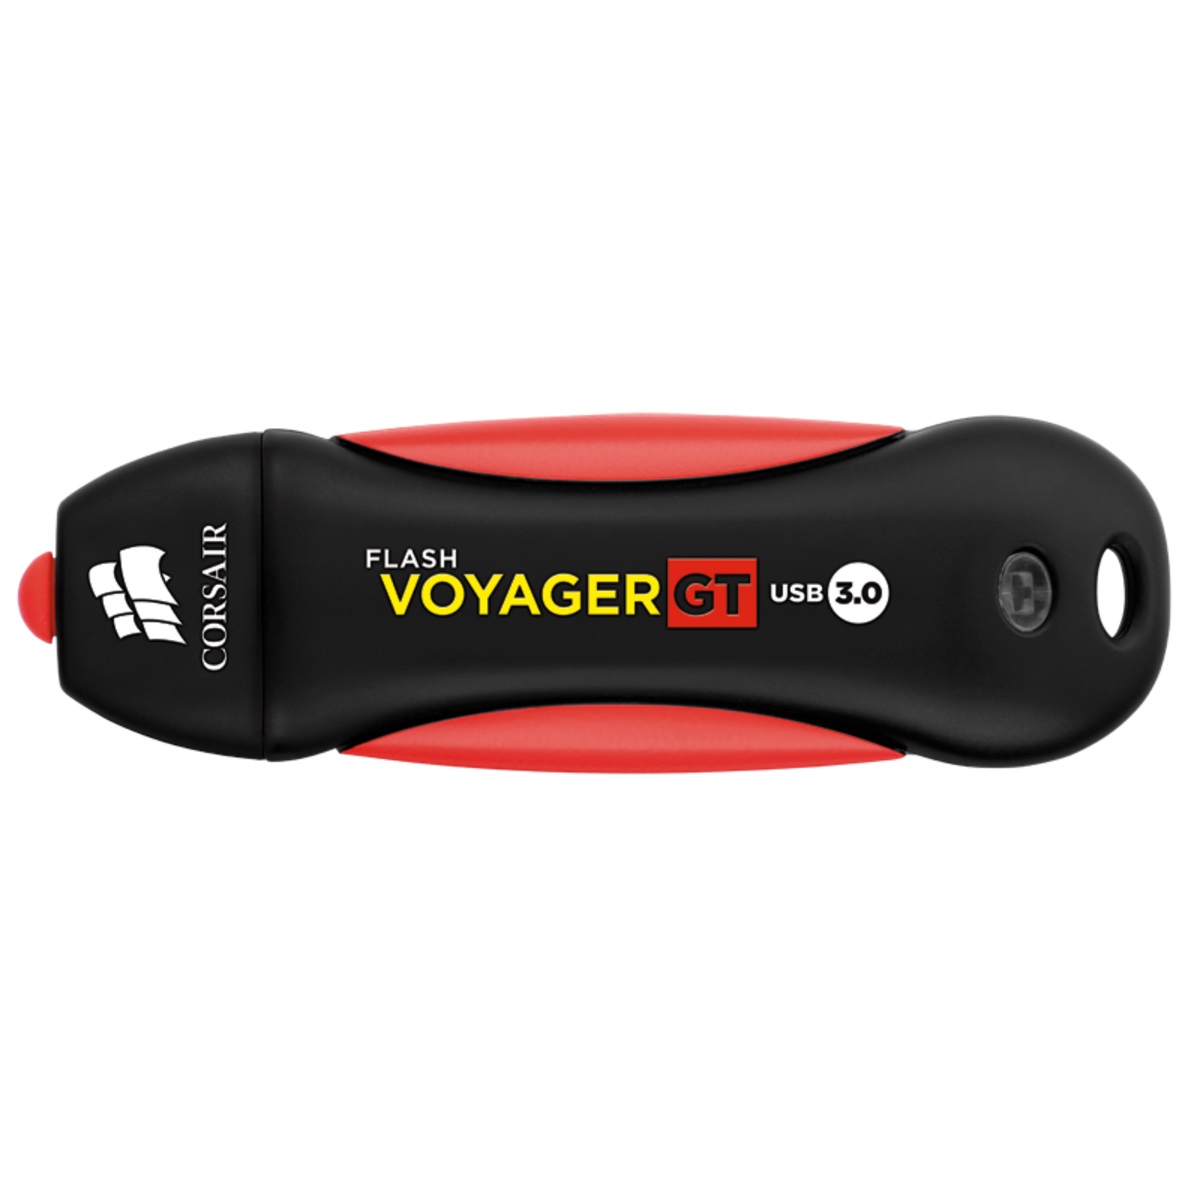 USB3.0 512GB Corsair Flash Voyager GT water-resistant all-rubber housi